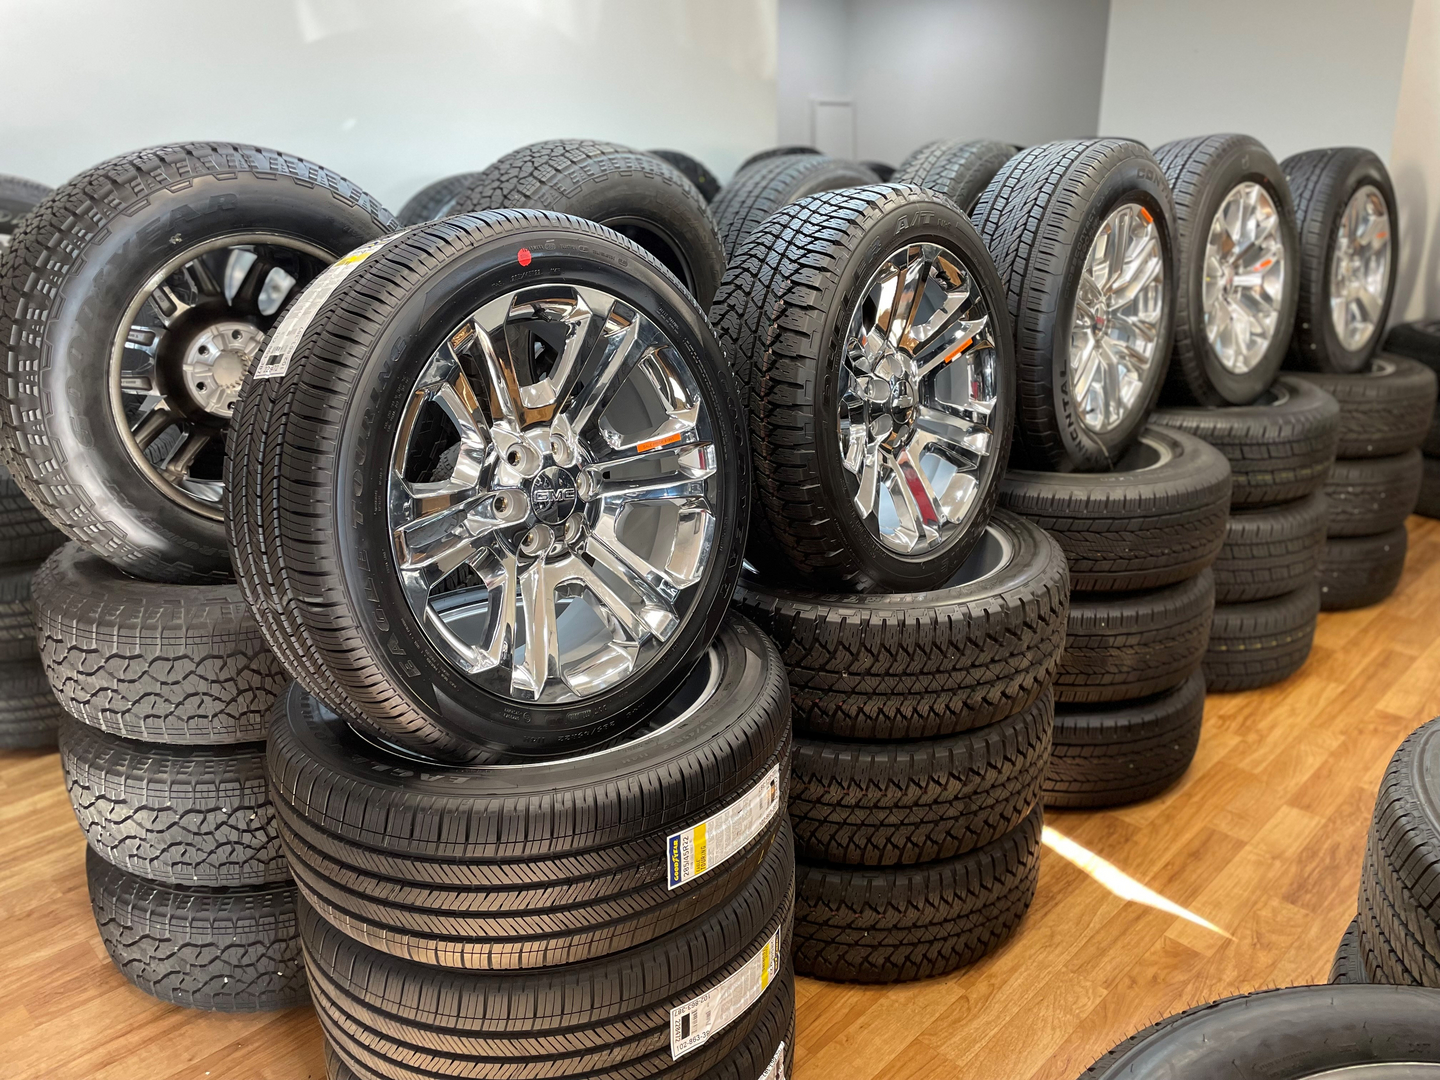 Rpm Takeoffs - Factory Takeoffs, Wheels And Tires, Wheels And Tires Packages